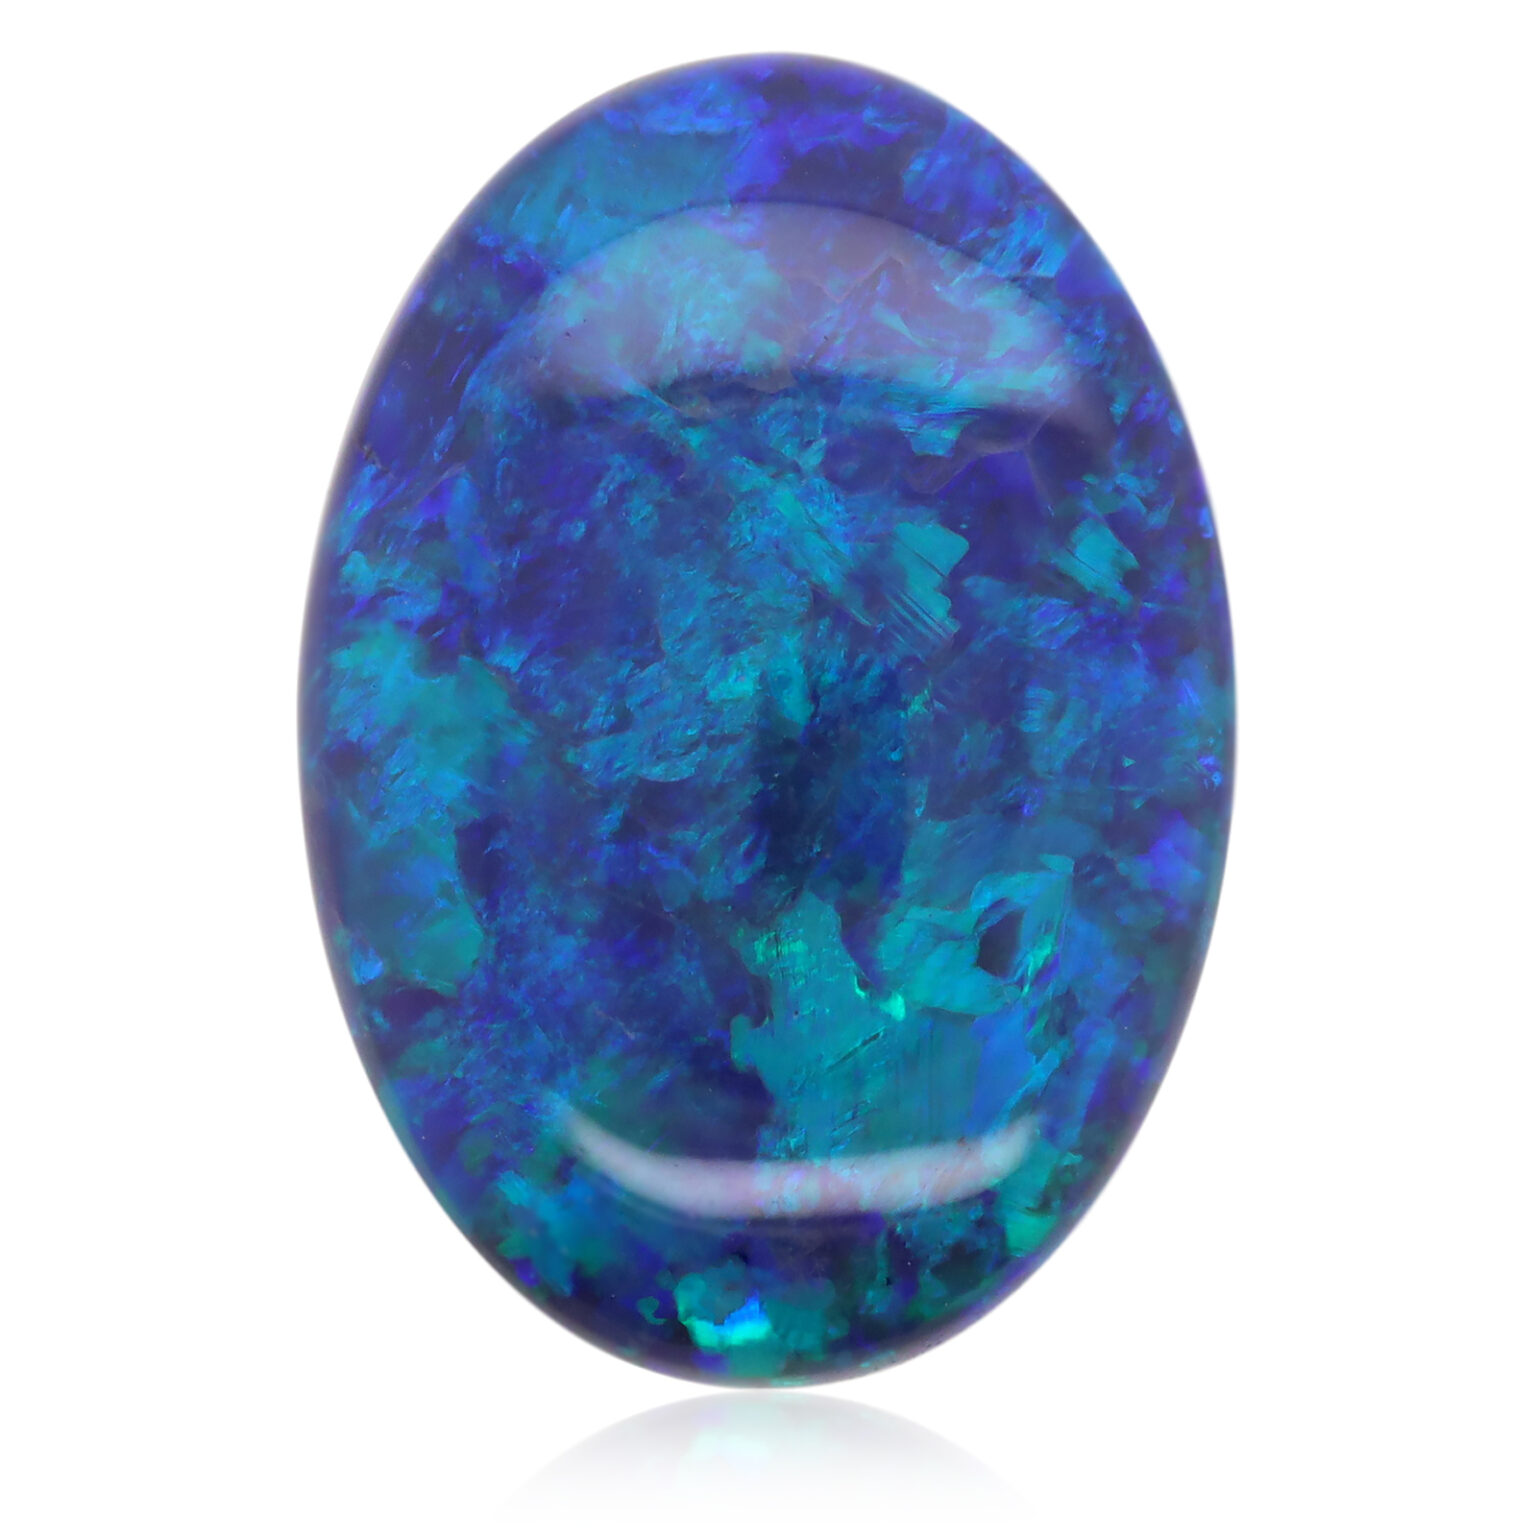 Unset Solid Black Opal | Opals Down Under